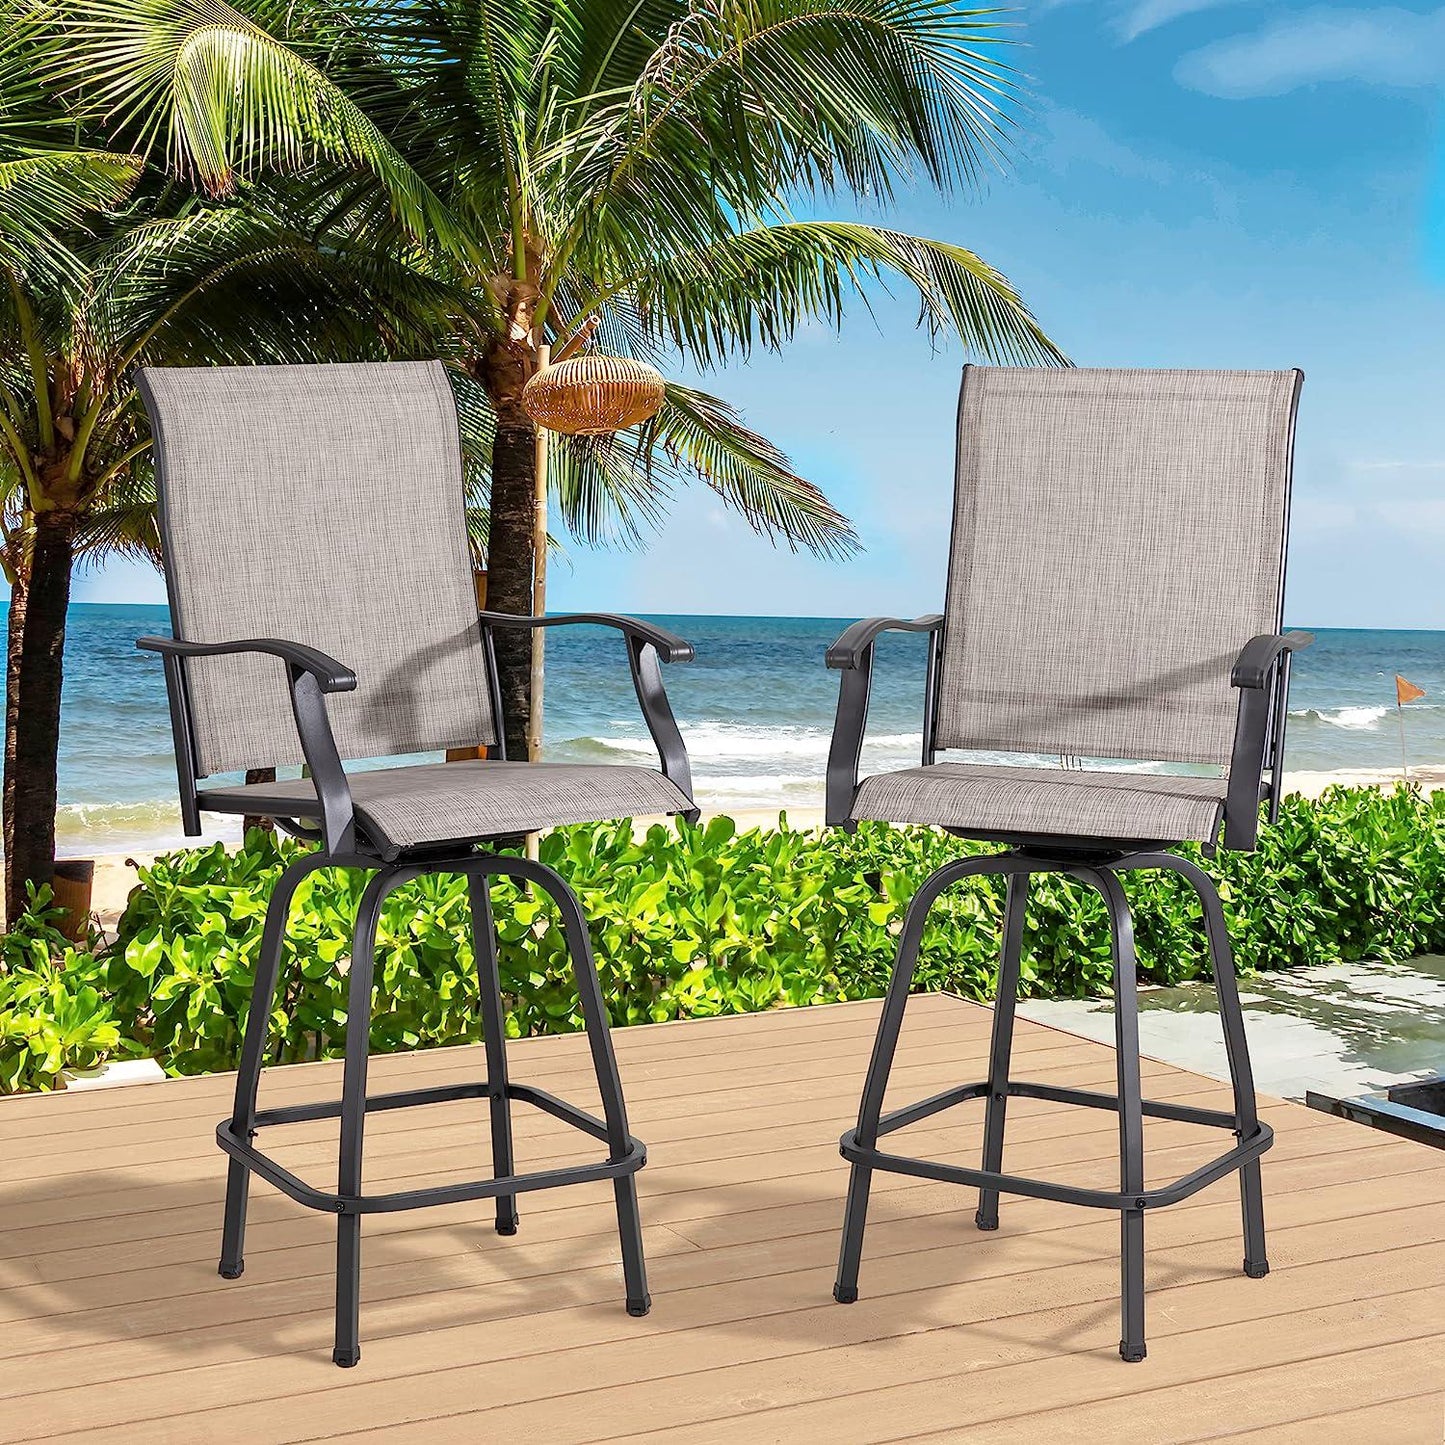 Vongrasig 2 Piece Patio Swivel Bar Chairs, All Weather Metal Textile High Swivel Bar Stools Chairs, Outdoor High Top Bistro Set for Backyard, Lawn Garden, Balcony, Taupe